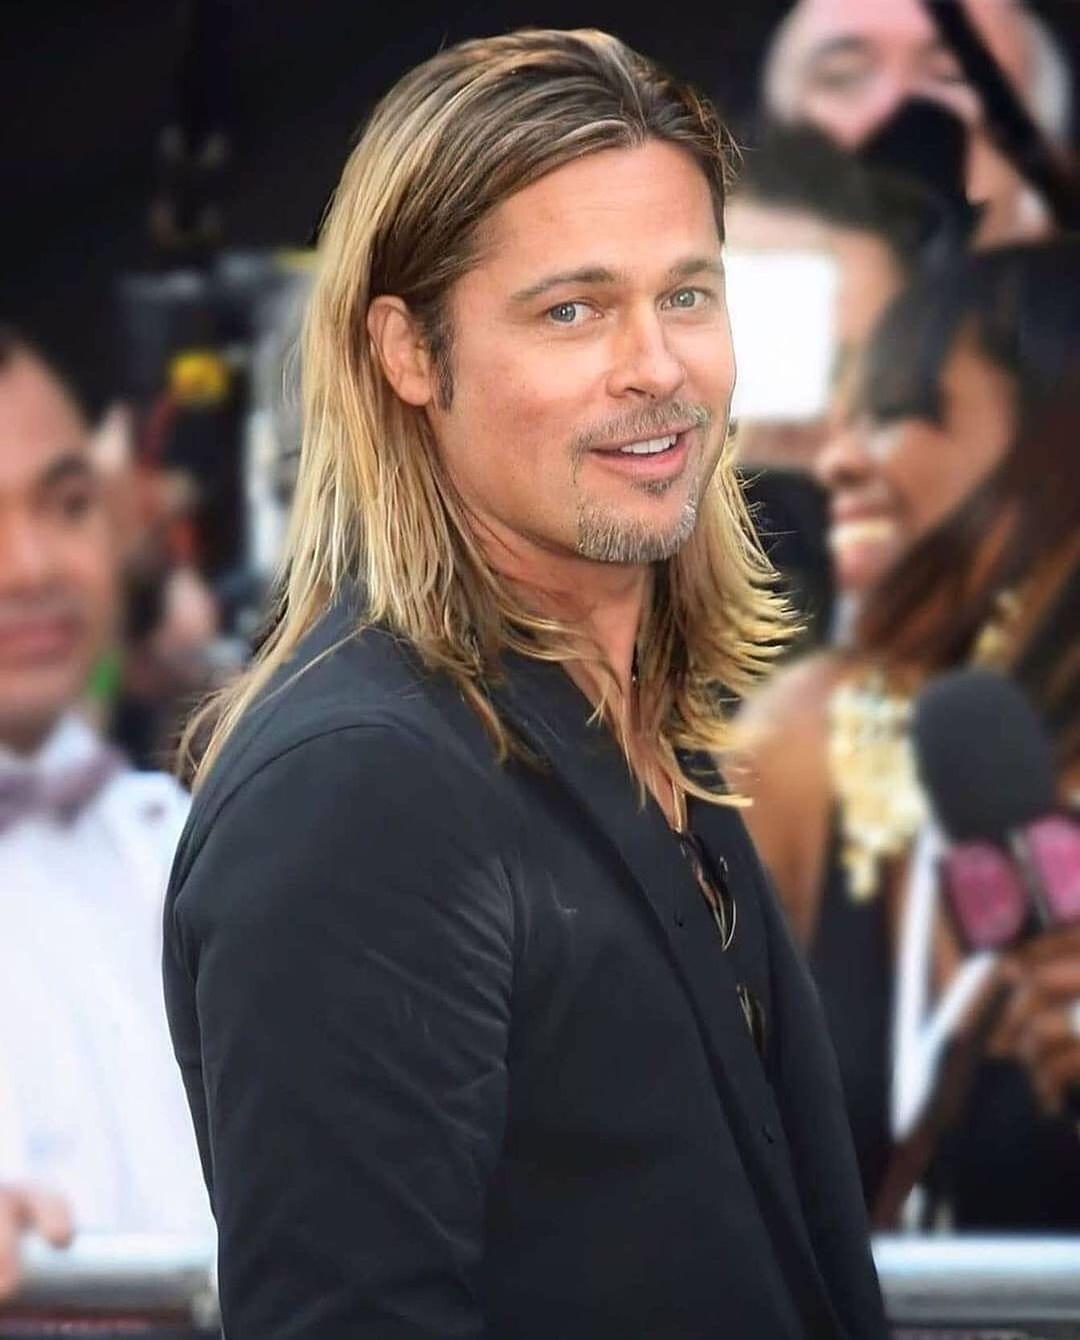 Jared Leto, Chris Hemsworth, Brad Pitt And Many More: Hottest Celebs Who  Rock The Long Hair